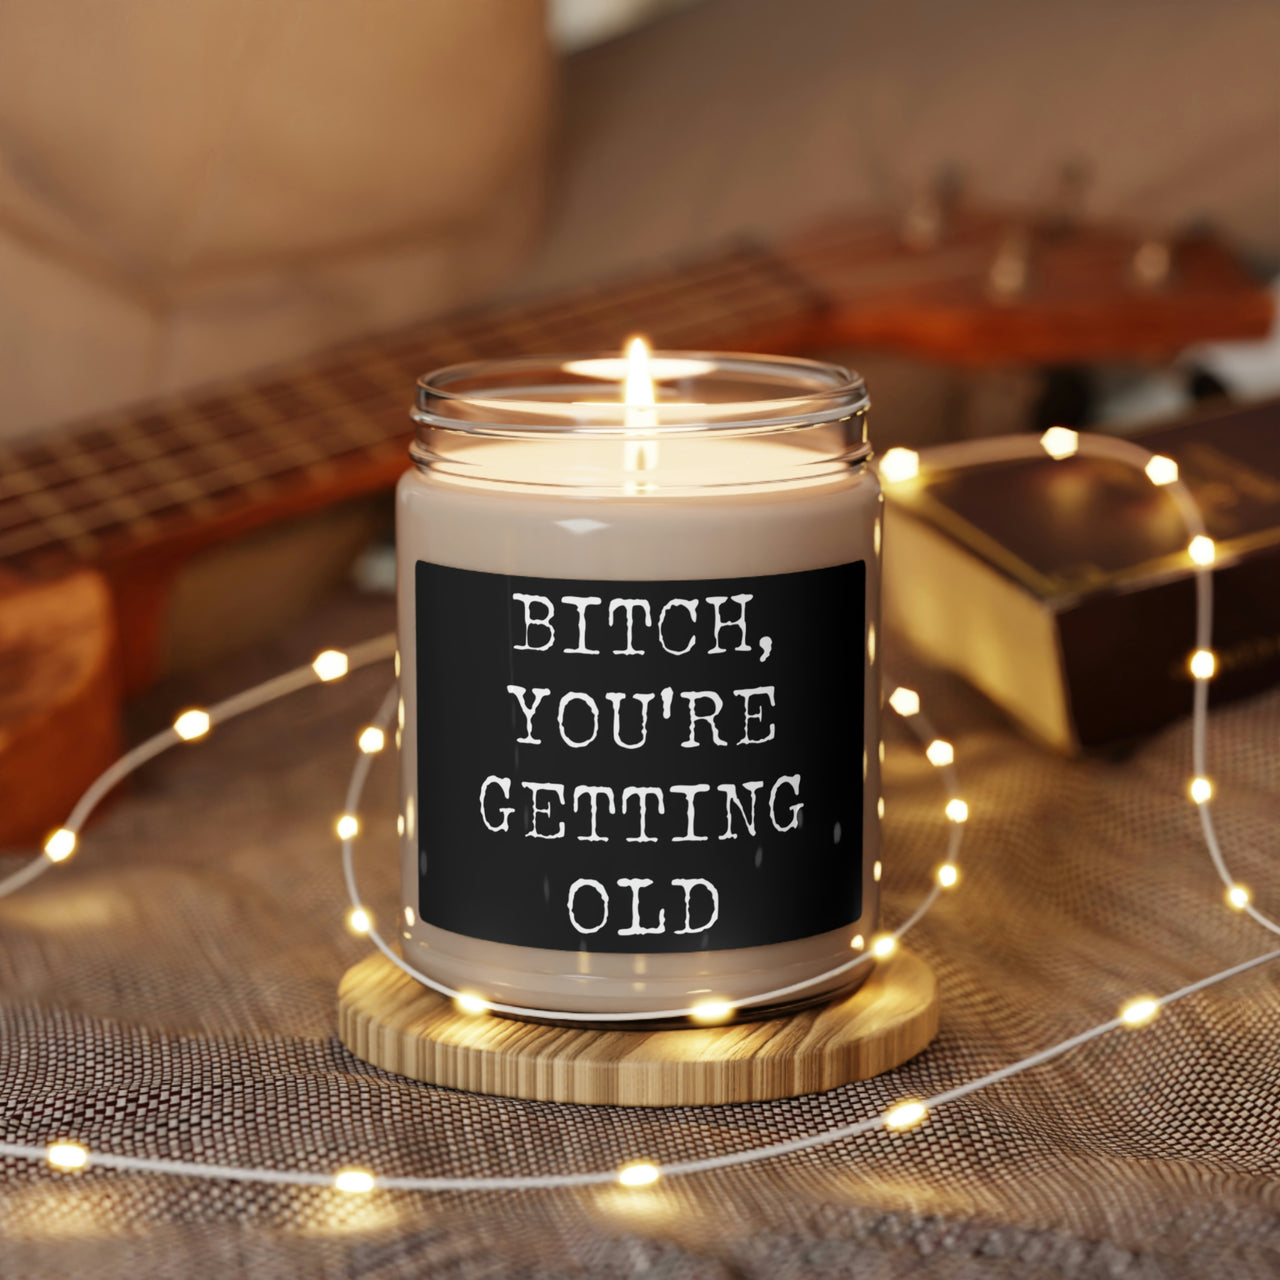 Bitch You're Getting Old Candle - Funny Sarcastic Birthday Candle Gift